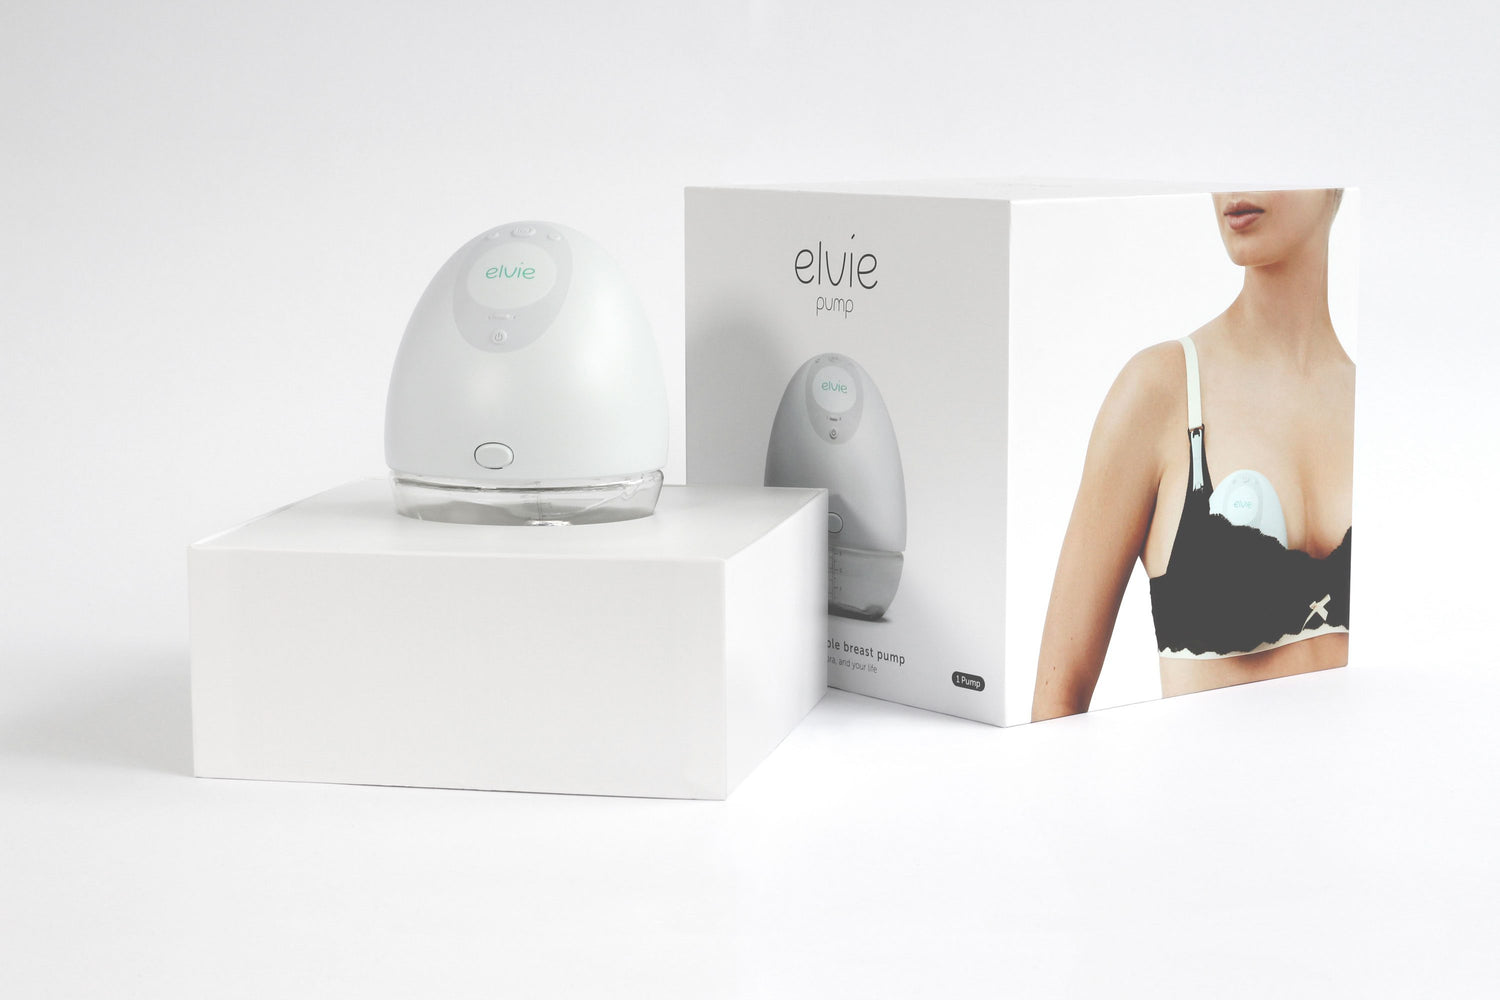 Checkout this AMAZING offer on the Elvie Breast Pump - Shopping : Bump,  Baby and You, Pregnancy, Parenting and Baby Advice and Info